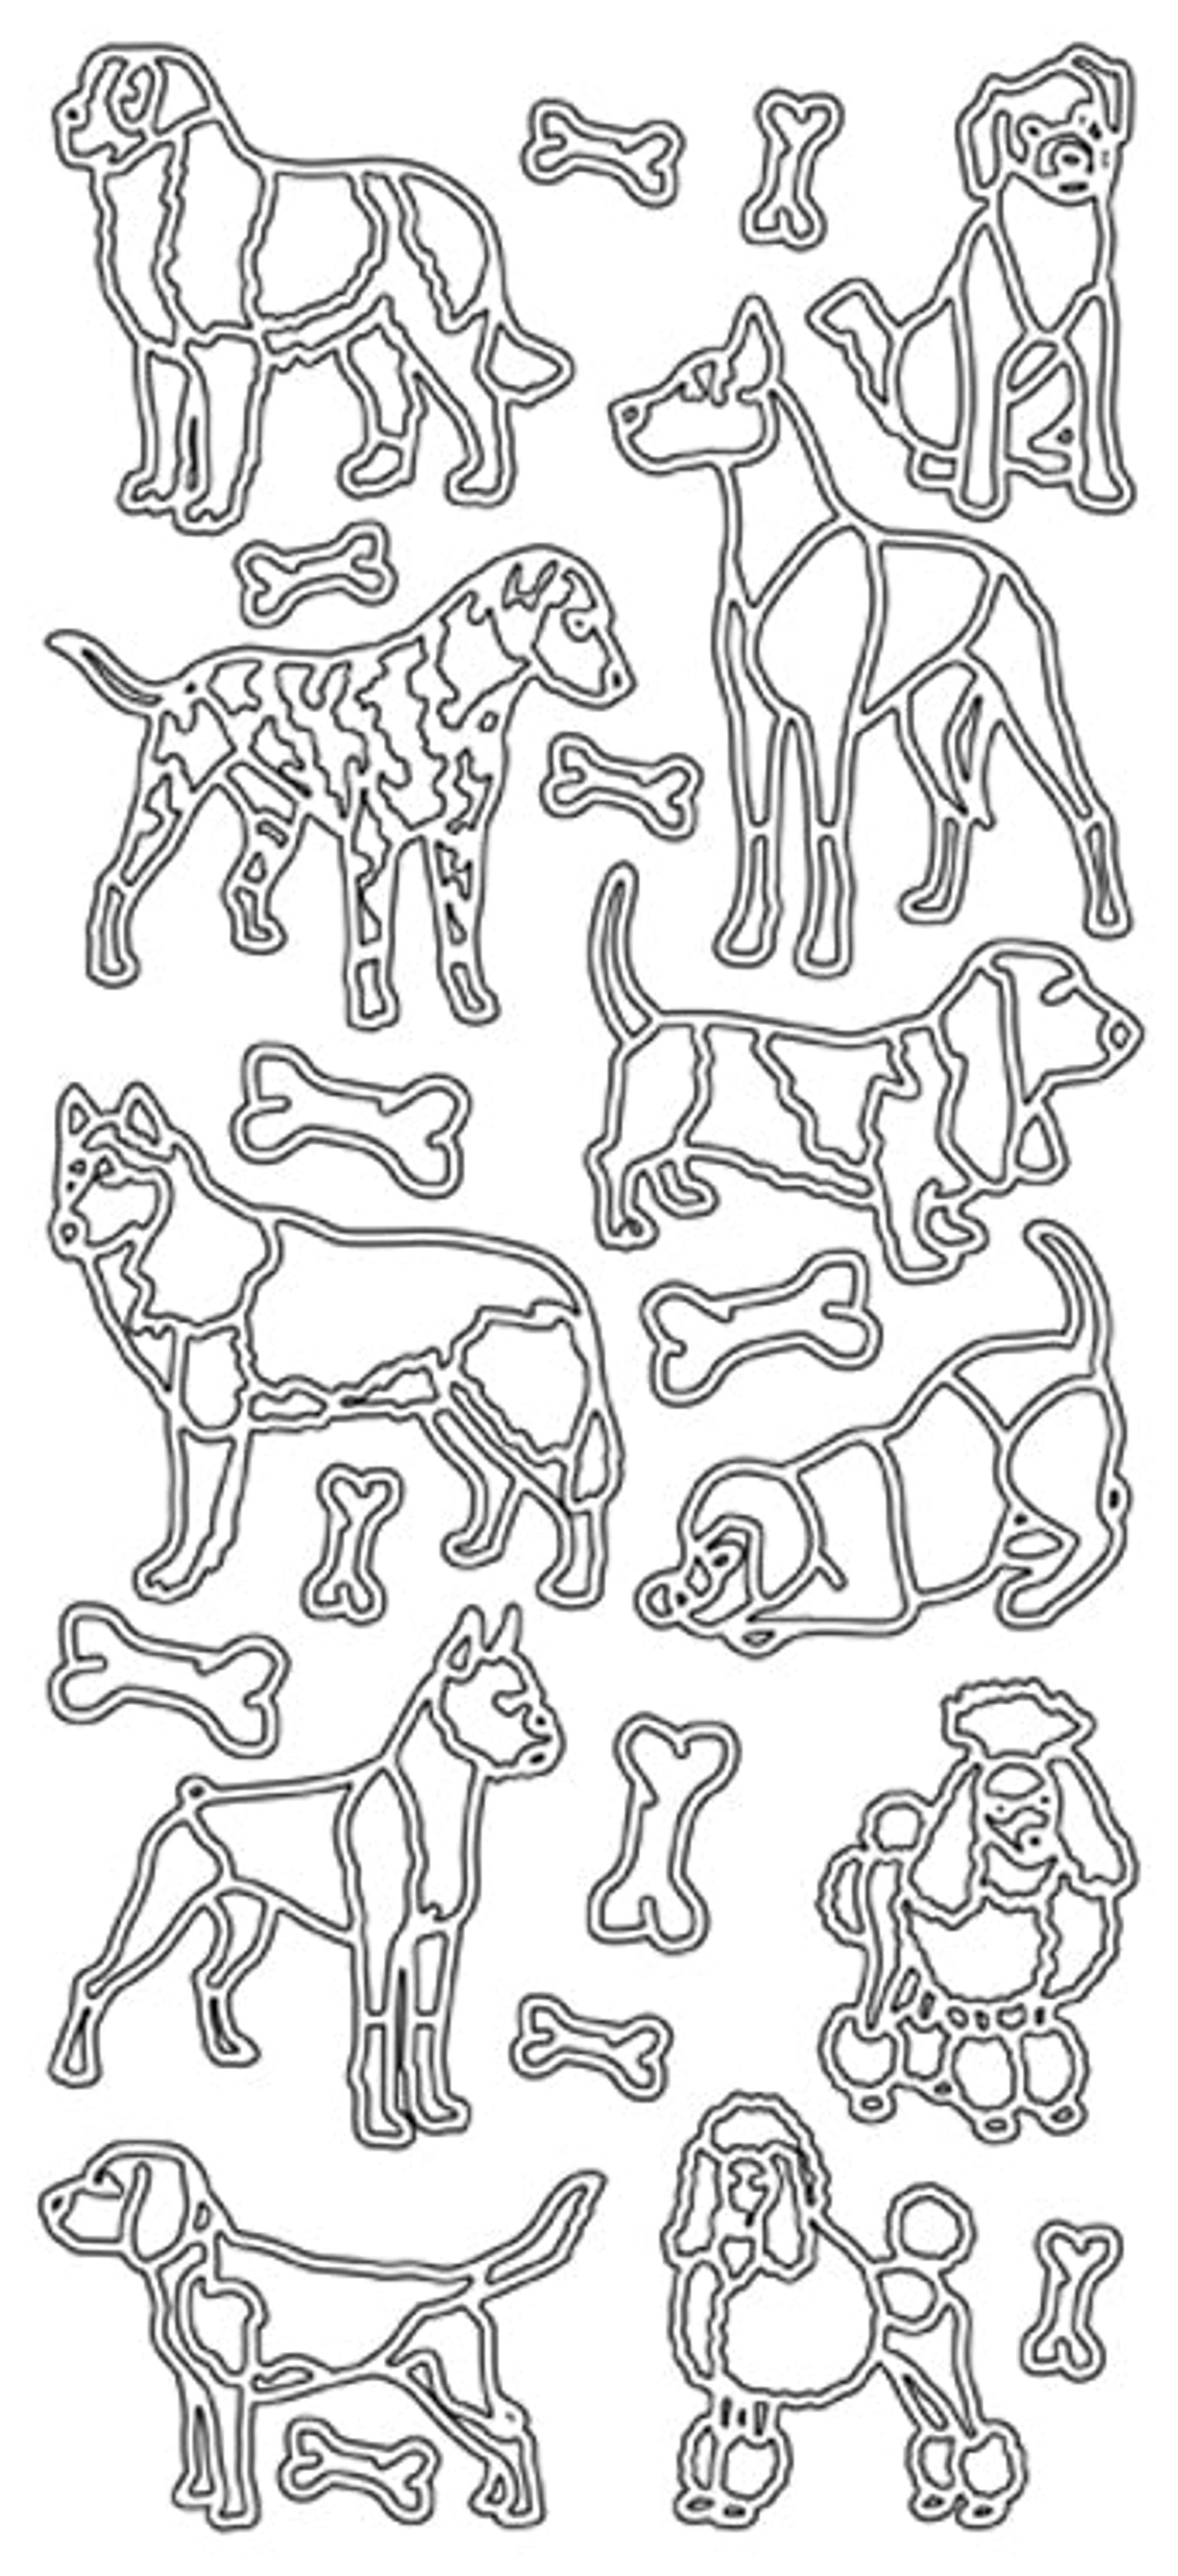 Peel-Off Stickers - Various Dogs